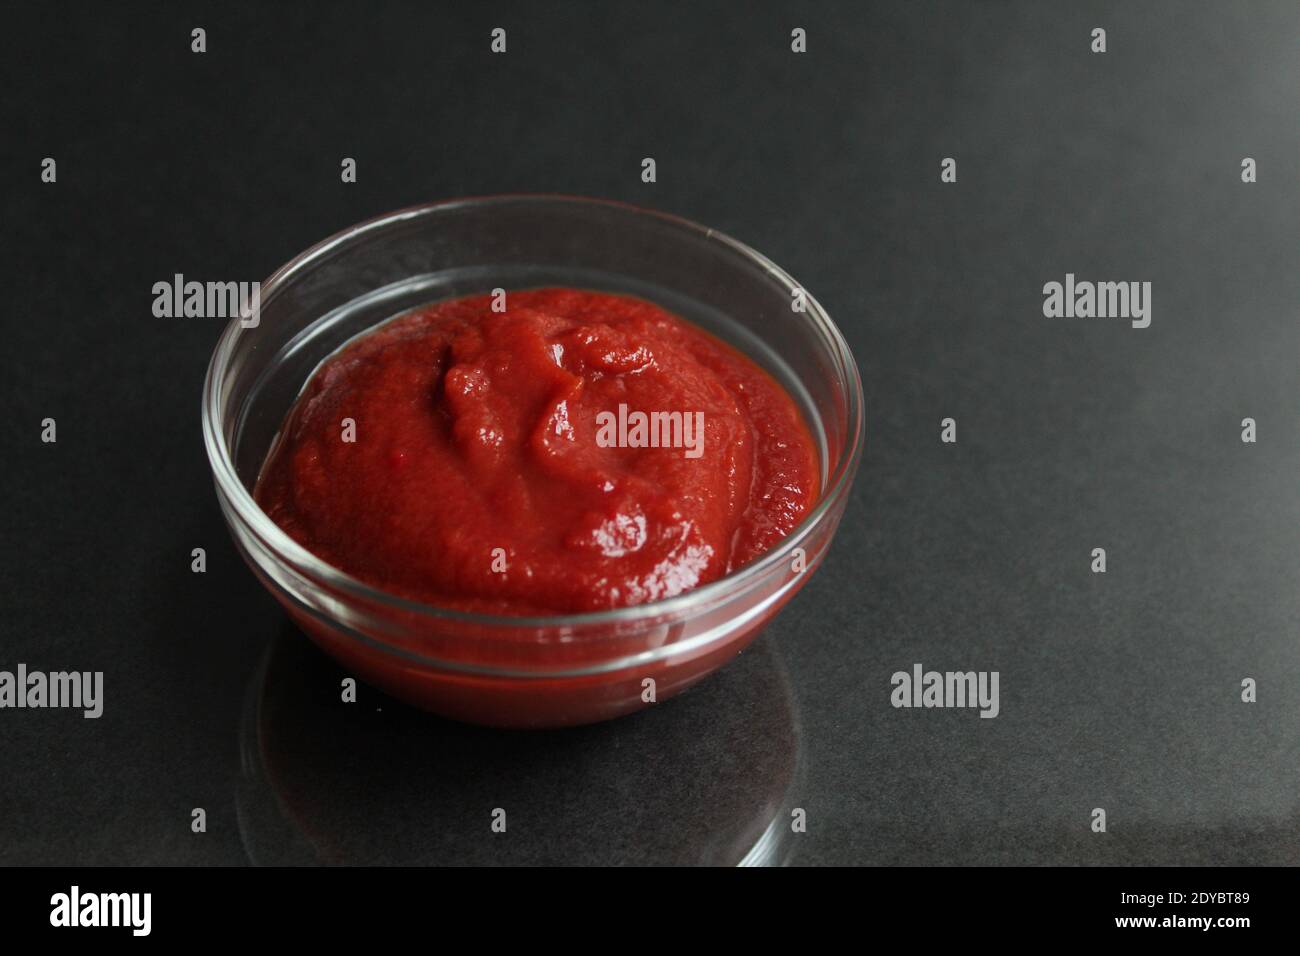 red tomato sauce paste in a glass sauce bowl on a black background copy space place for text. Stock Photo